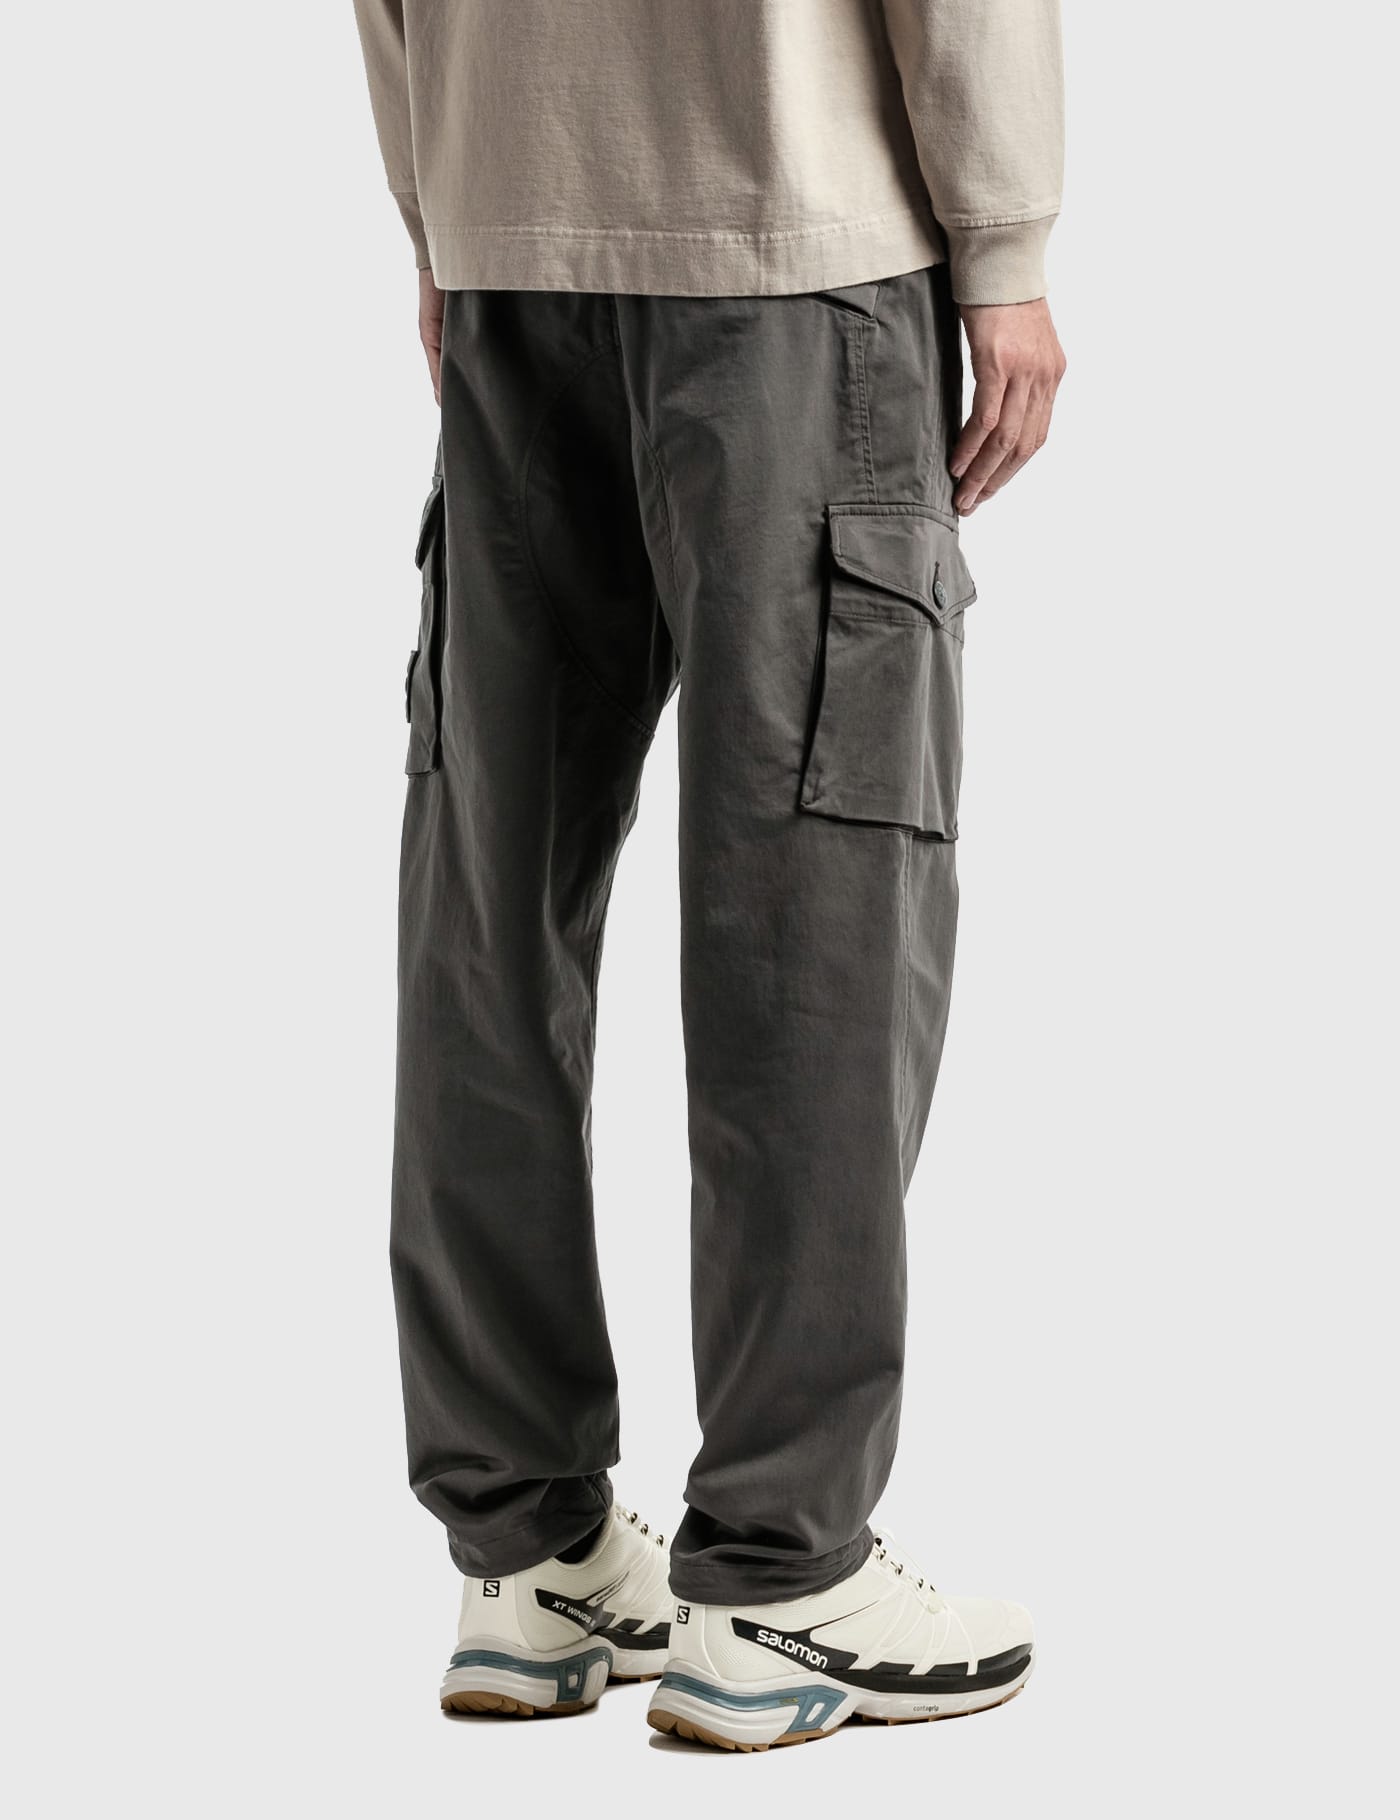 Stone Island - Ghost Piece Cargo Pants | HBX - Globally Curated Fashion and  Lifestyle by Hypebeast